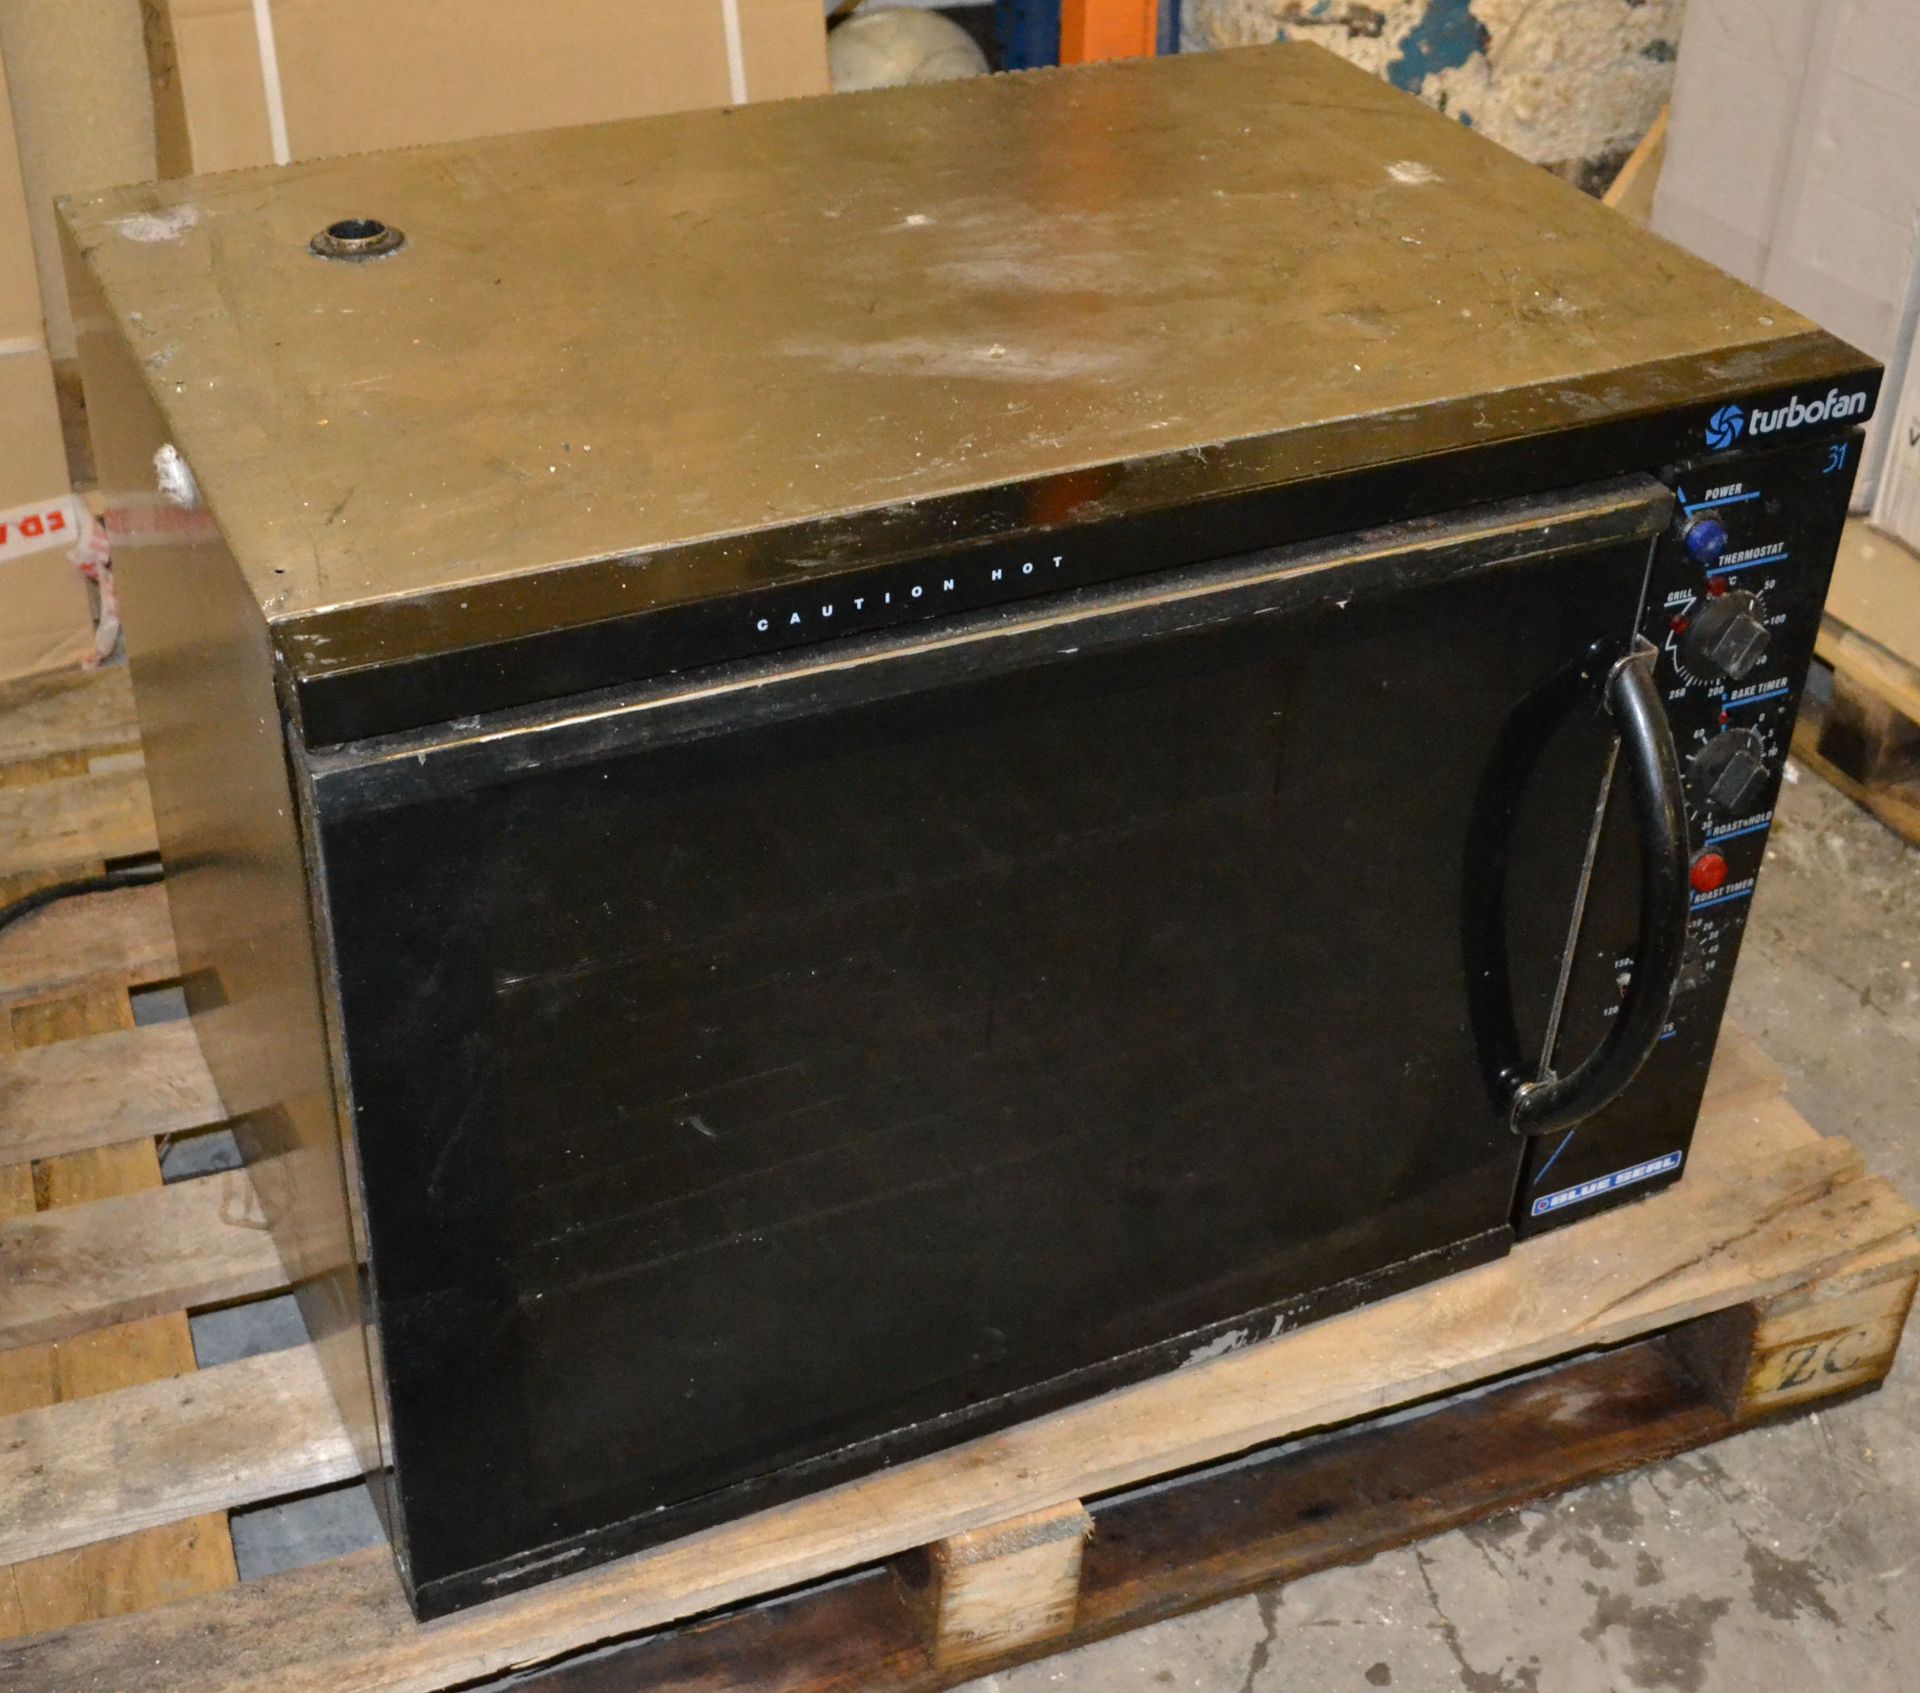 1 x Blue Seal E31 Turbofan Convection Oven - Ref: FJC012 - CL124 - Location: Bolton BL1 - Used